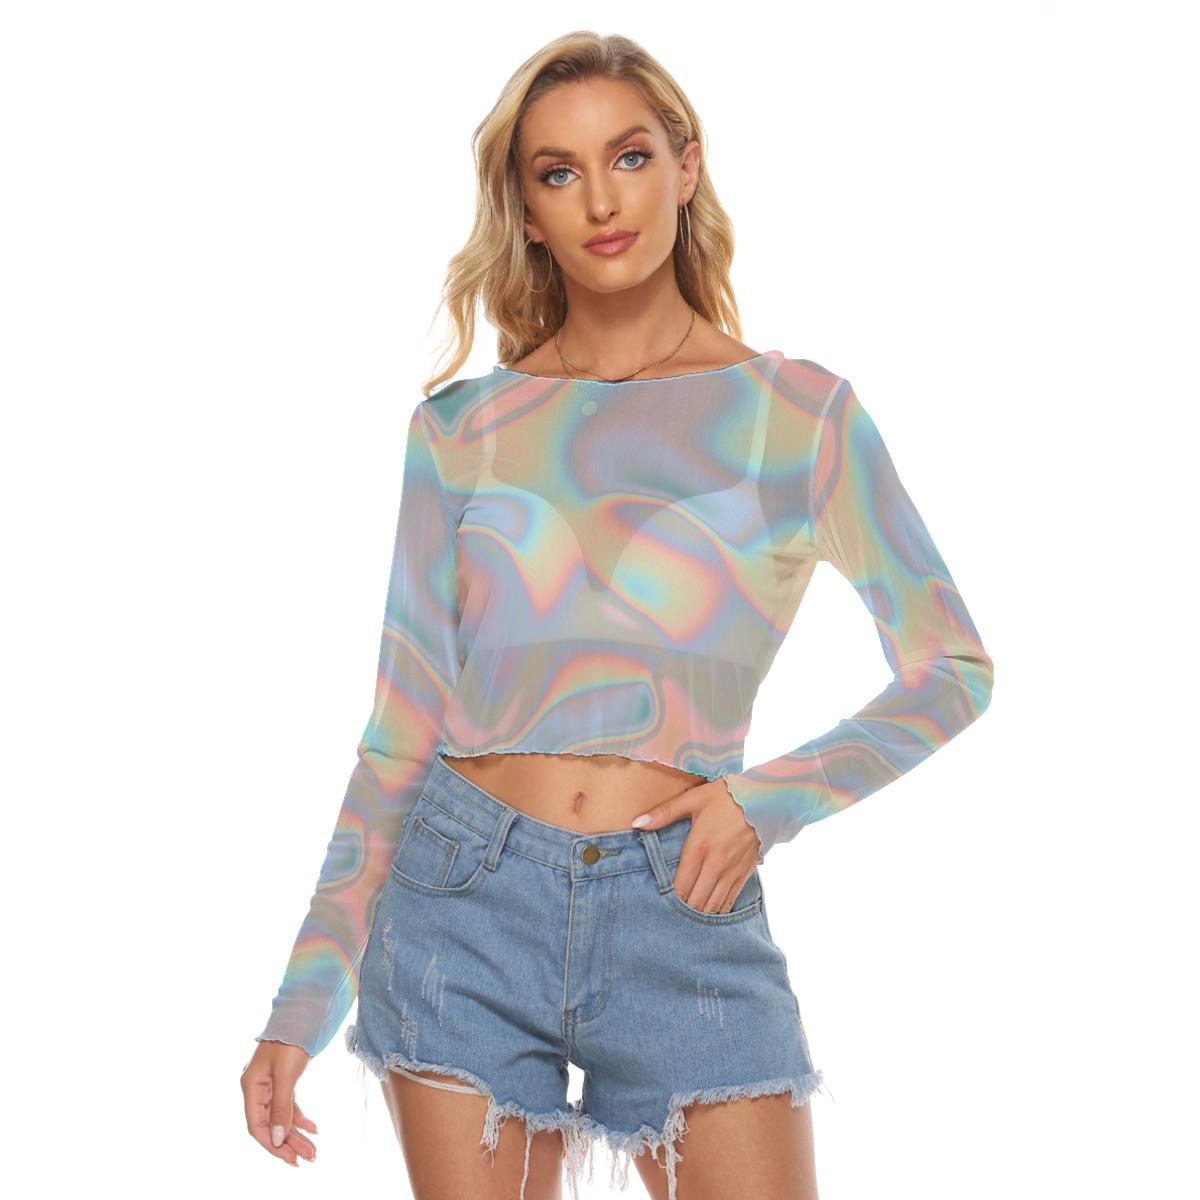 ost Meander aftale Ombre Iridescence Holographic Long Sleeves Mesh Top, Blue Pink Women's Mesh  Long Sleeves T-shirt | kayzers